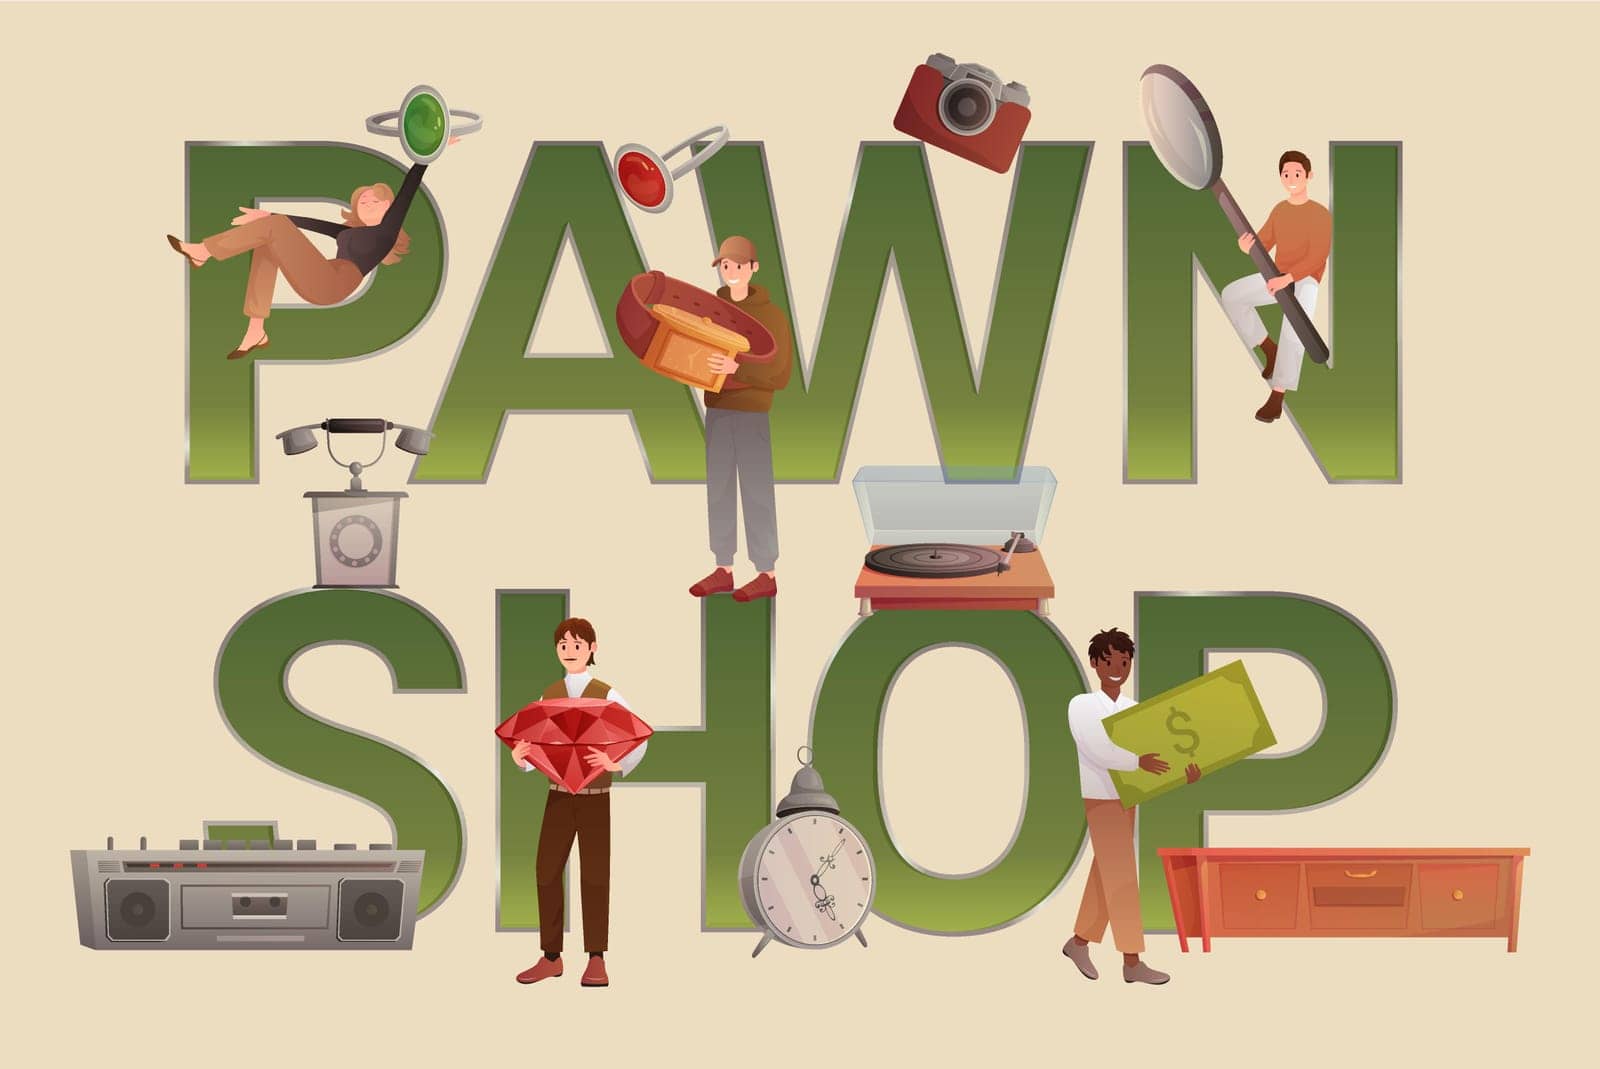 Pawnshop banner, poster design, tiny people buy and sell antique or jewelry in store by Popov